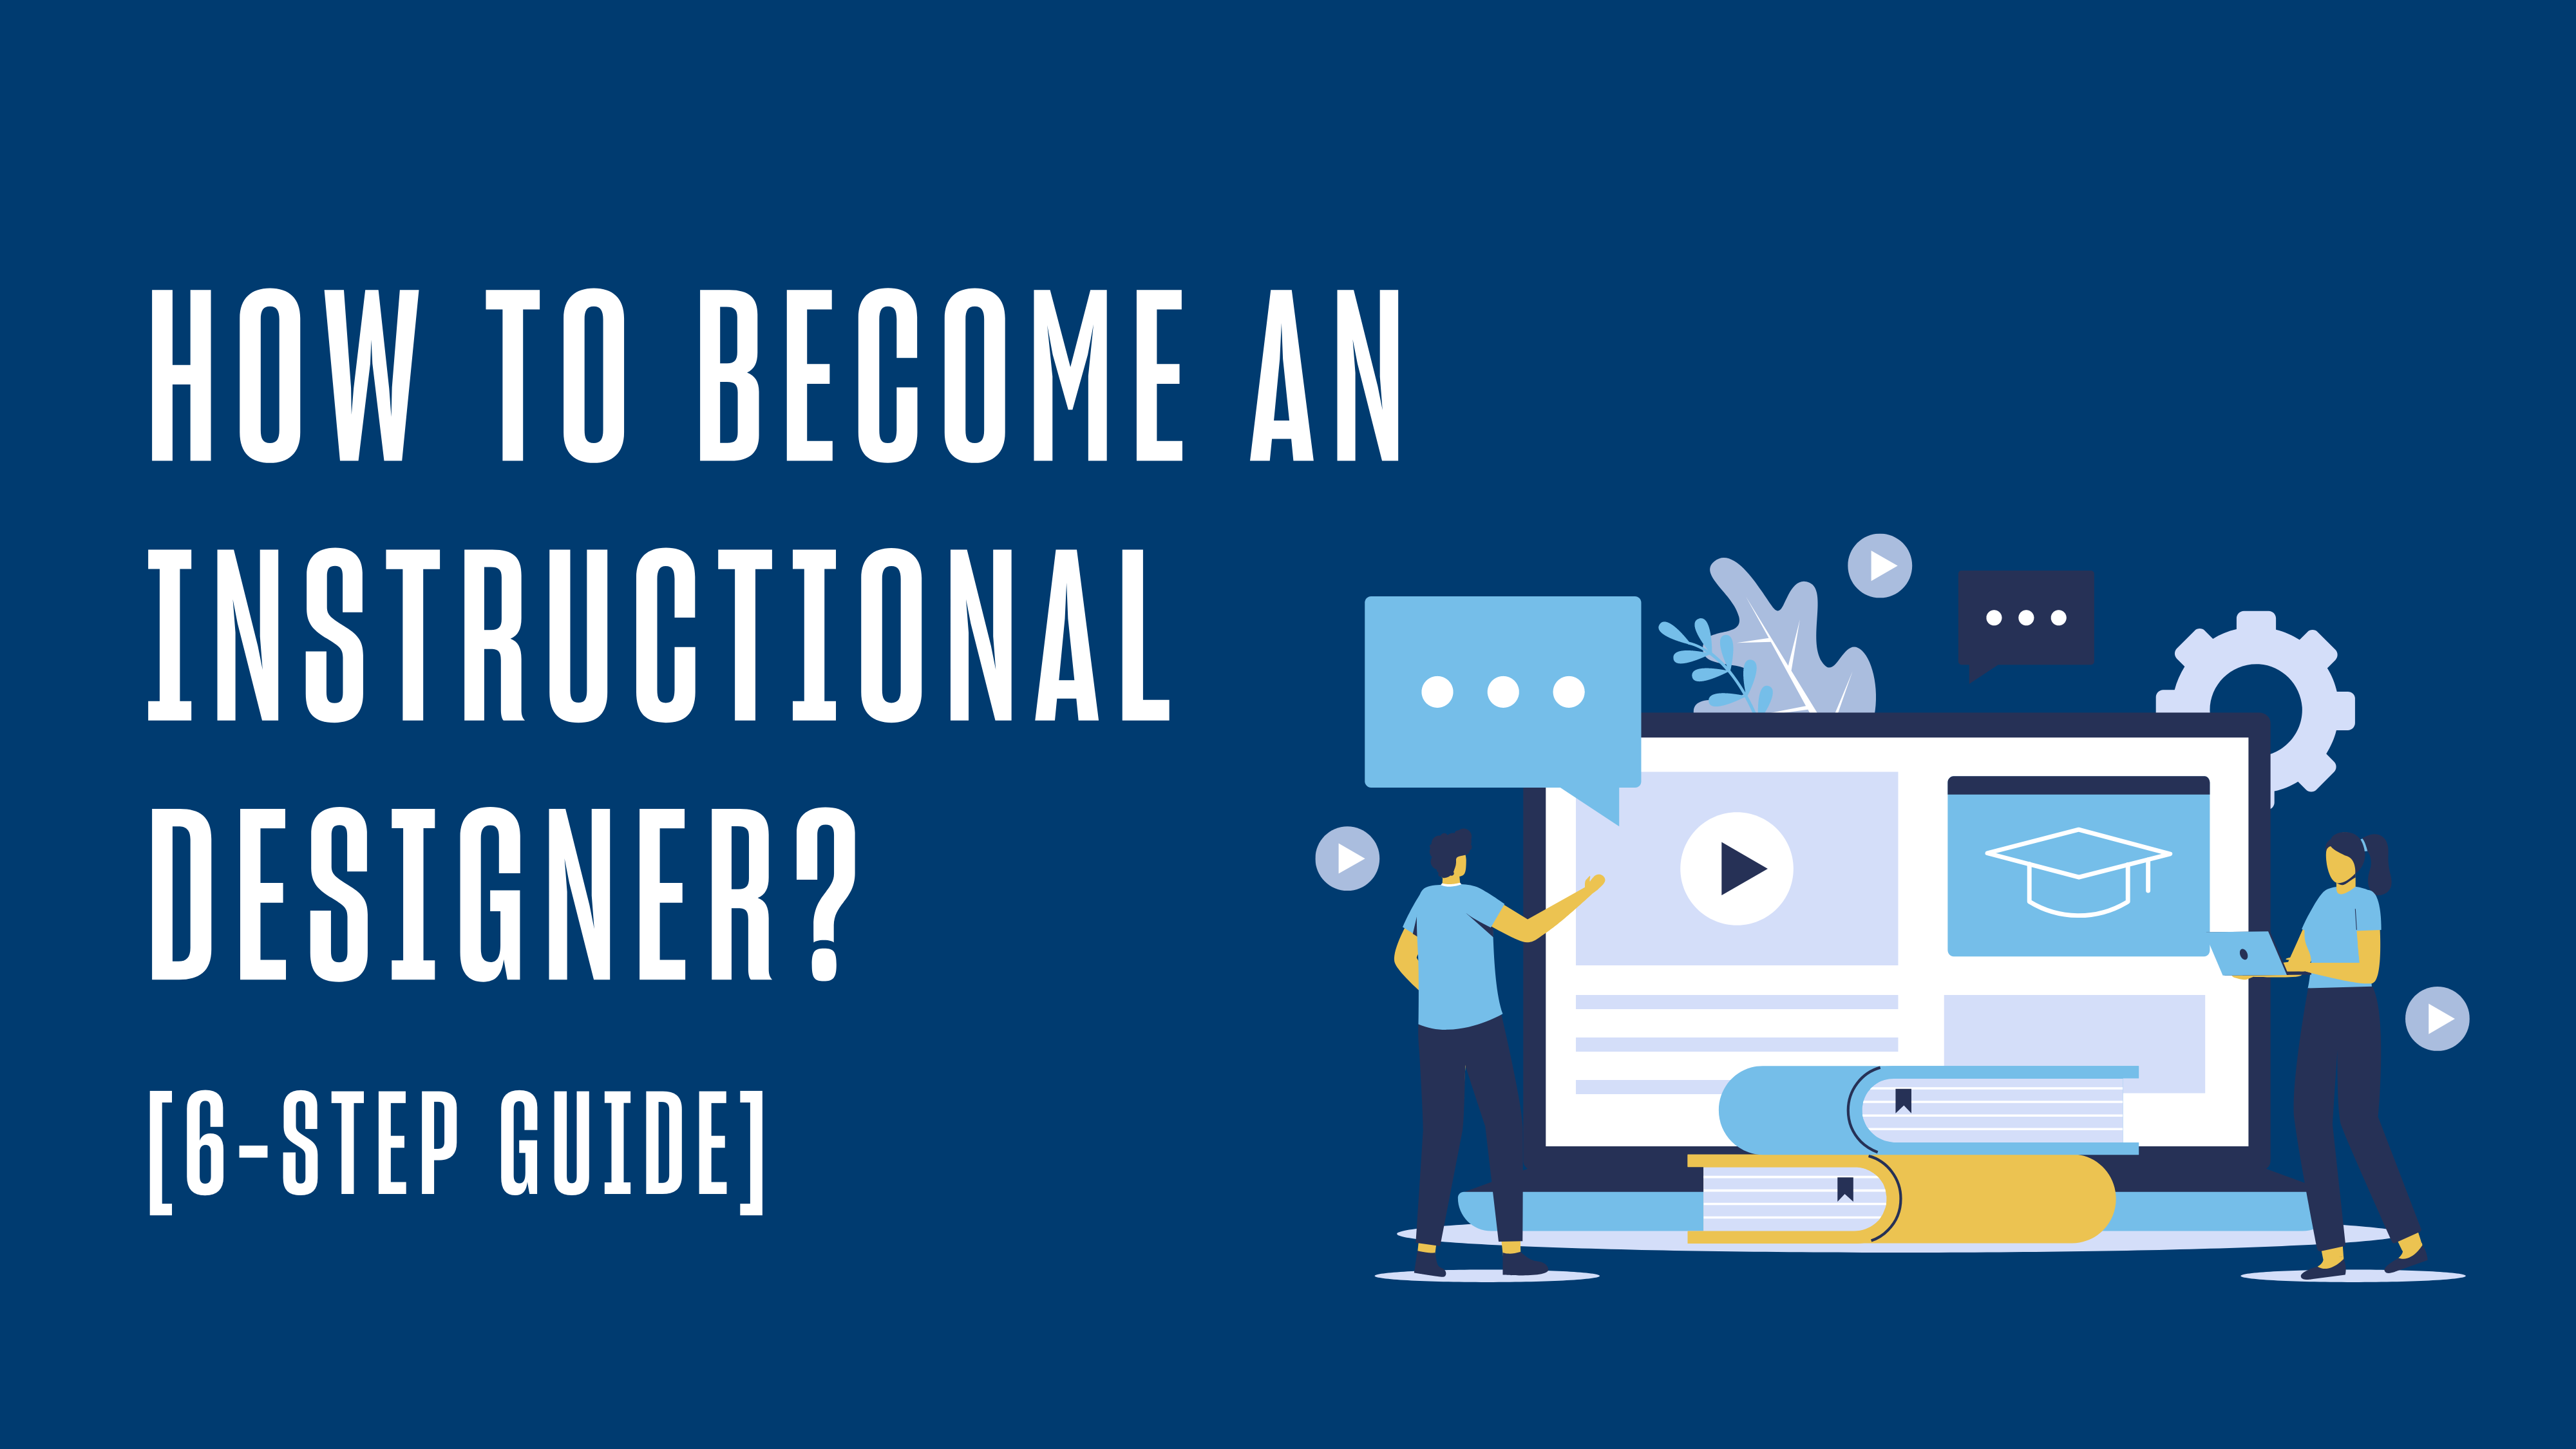 How to Become an Instructional Designer [6-Step Guide]